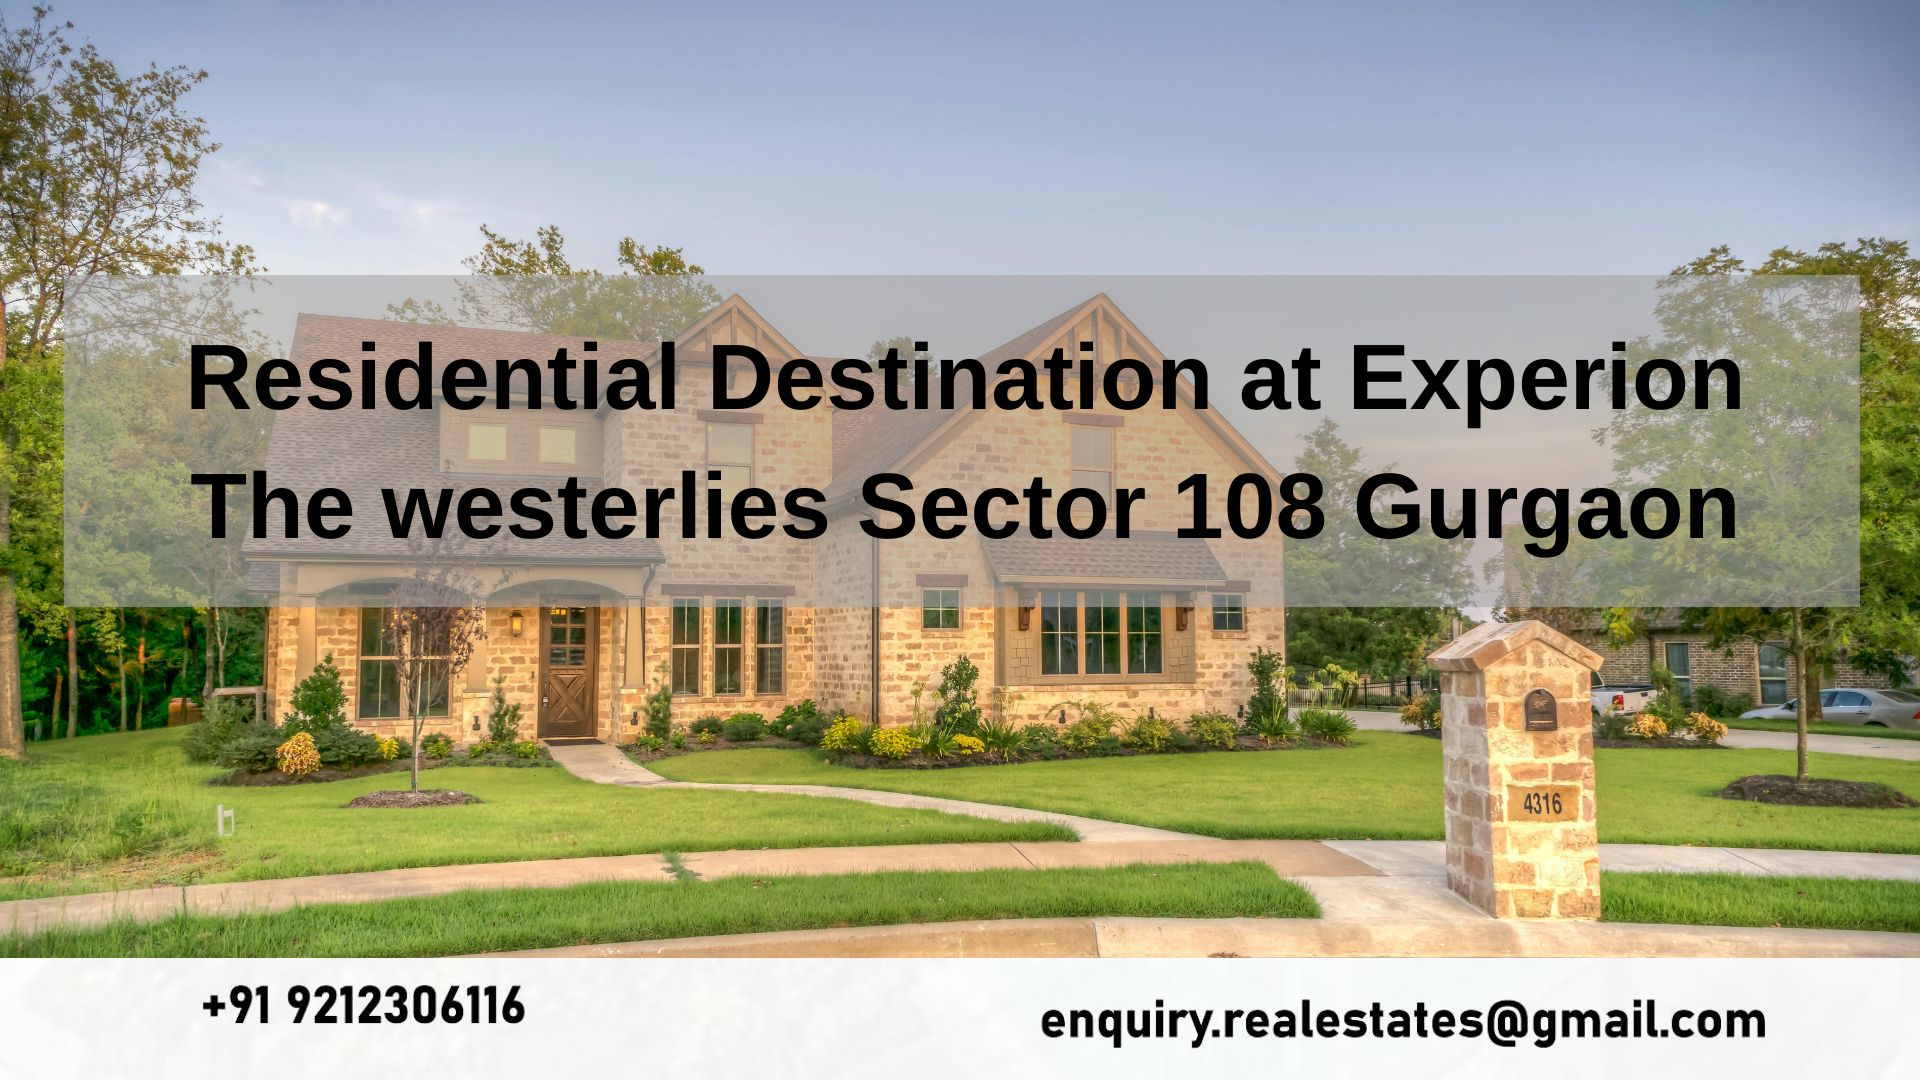 Residential Destination at Experion The westerlies Sector 108 Gurgaon